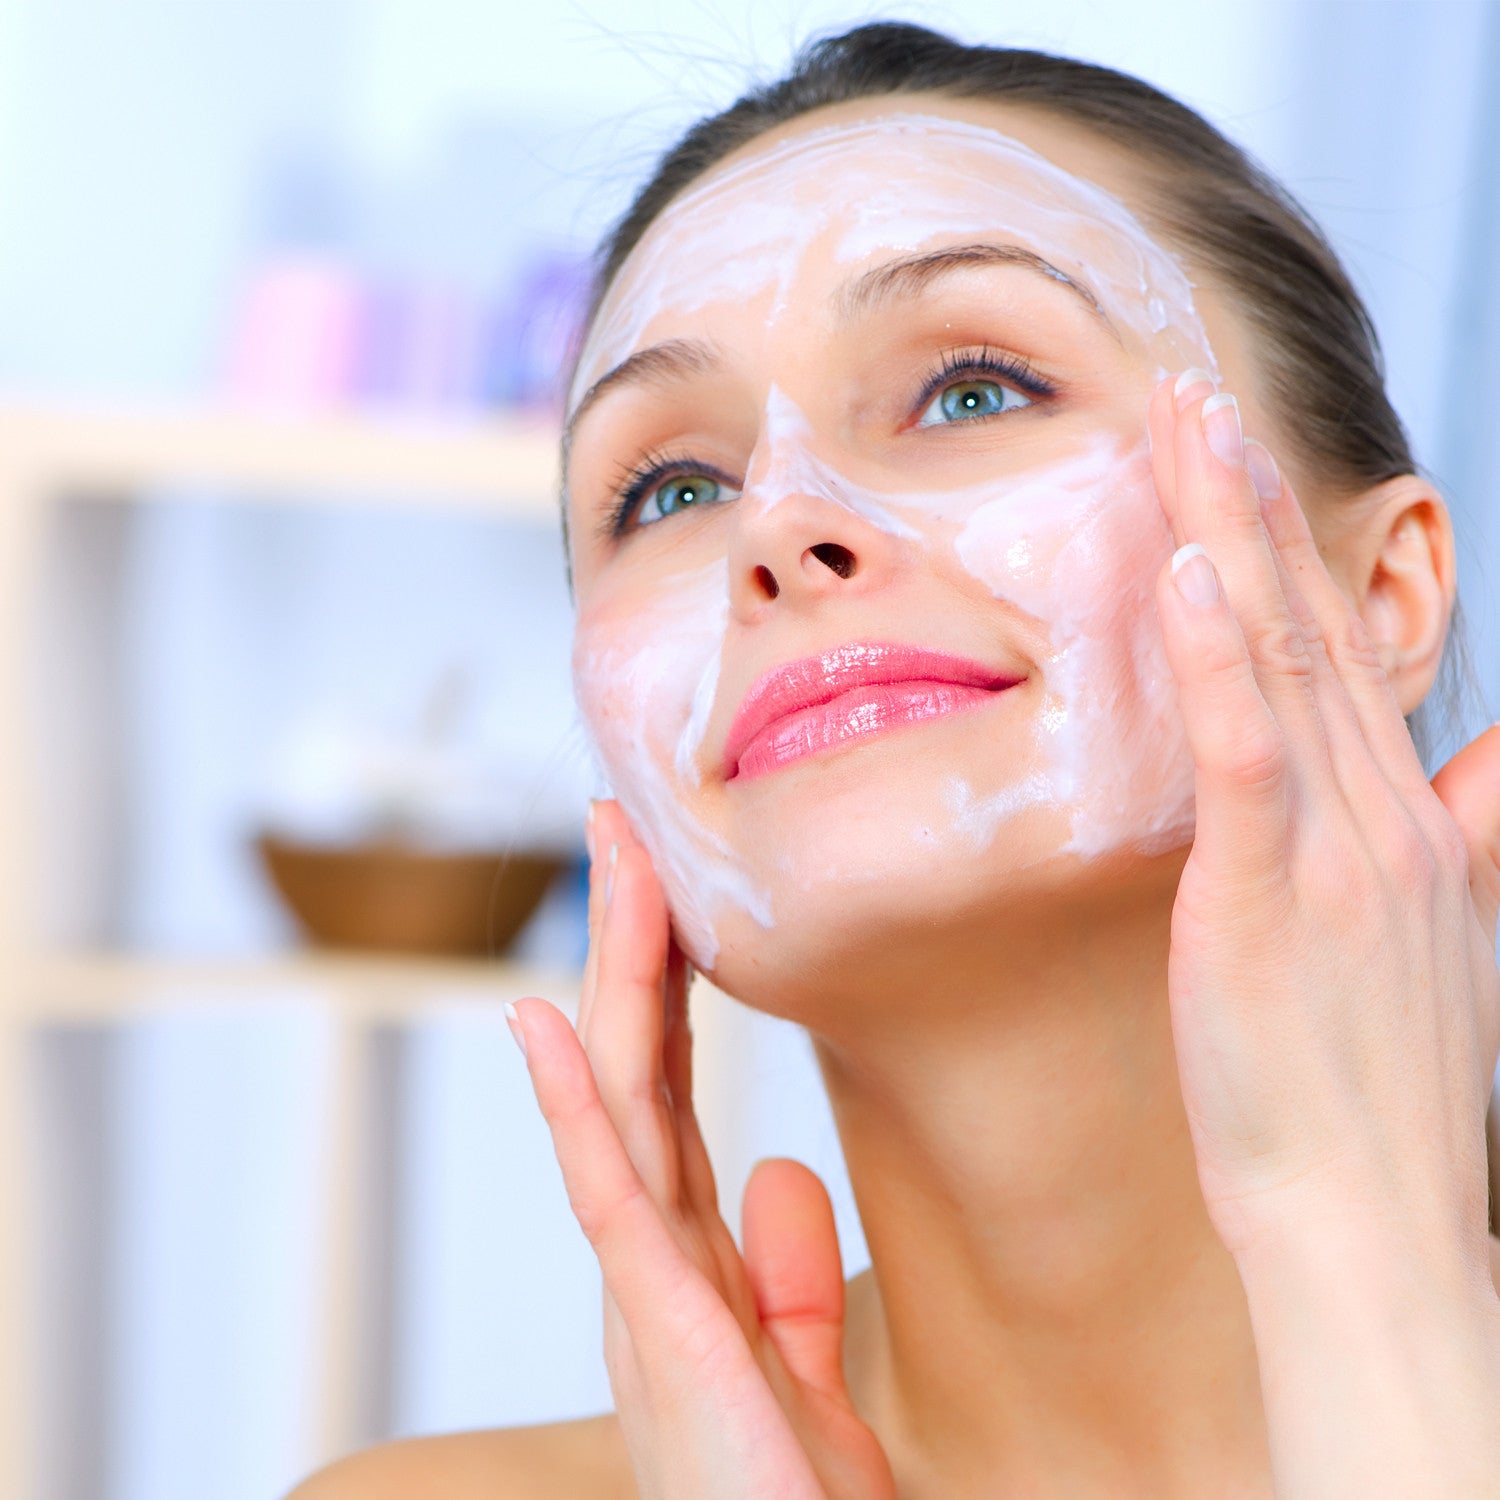 Discover the 4 reasons why you need to apply a facial mask now!